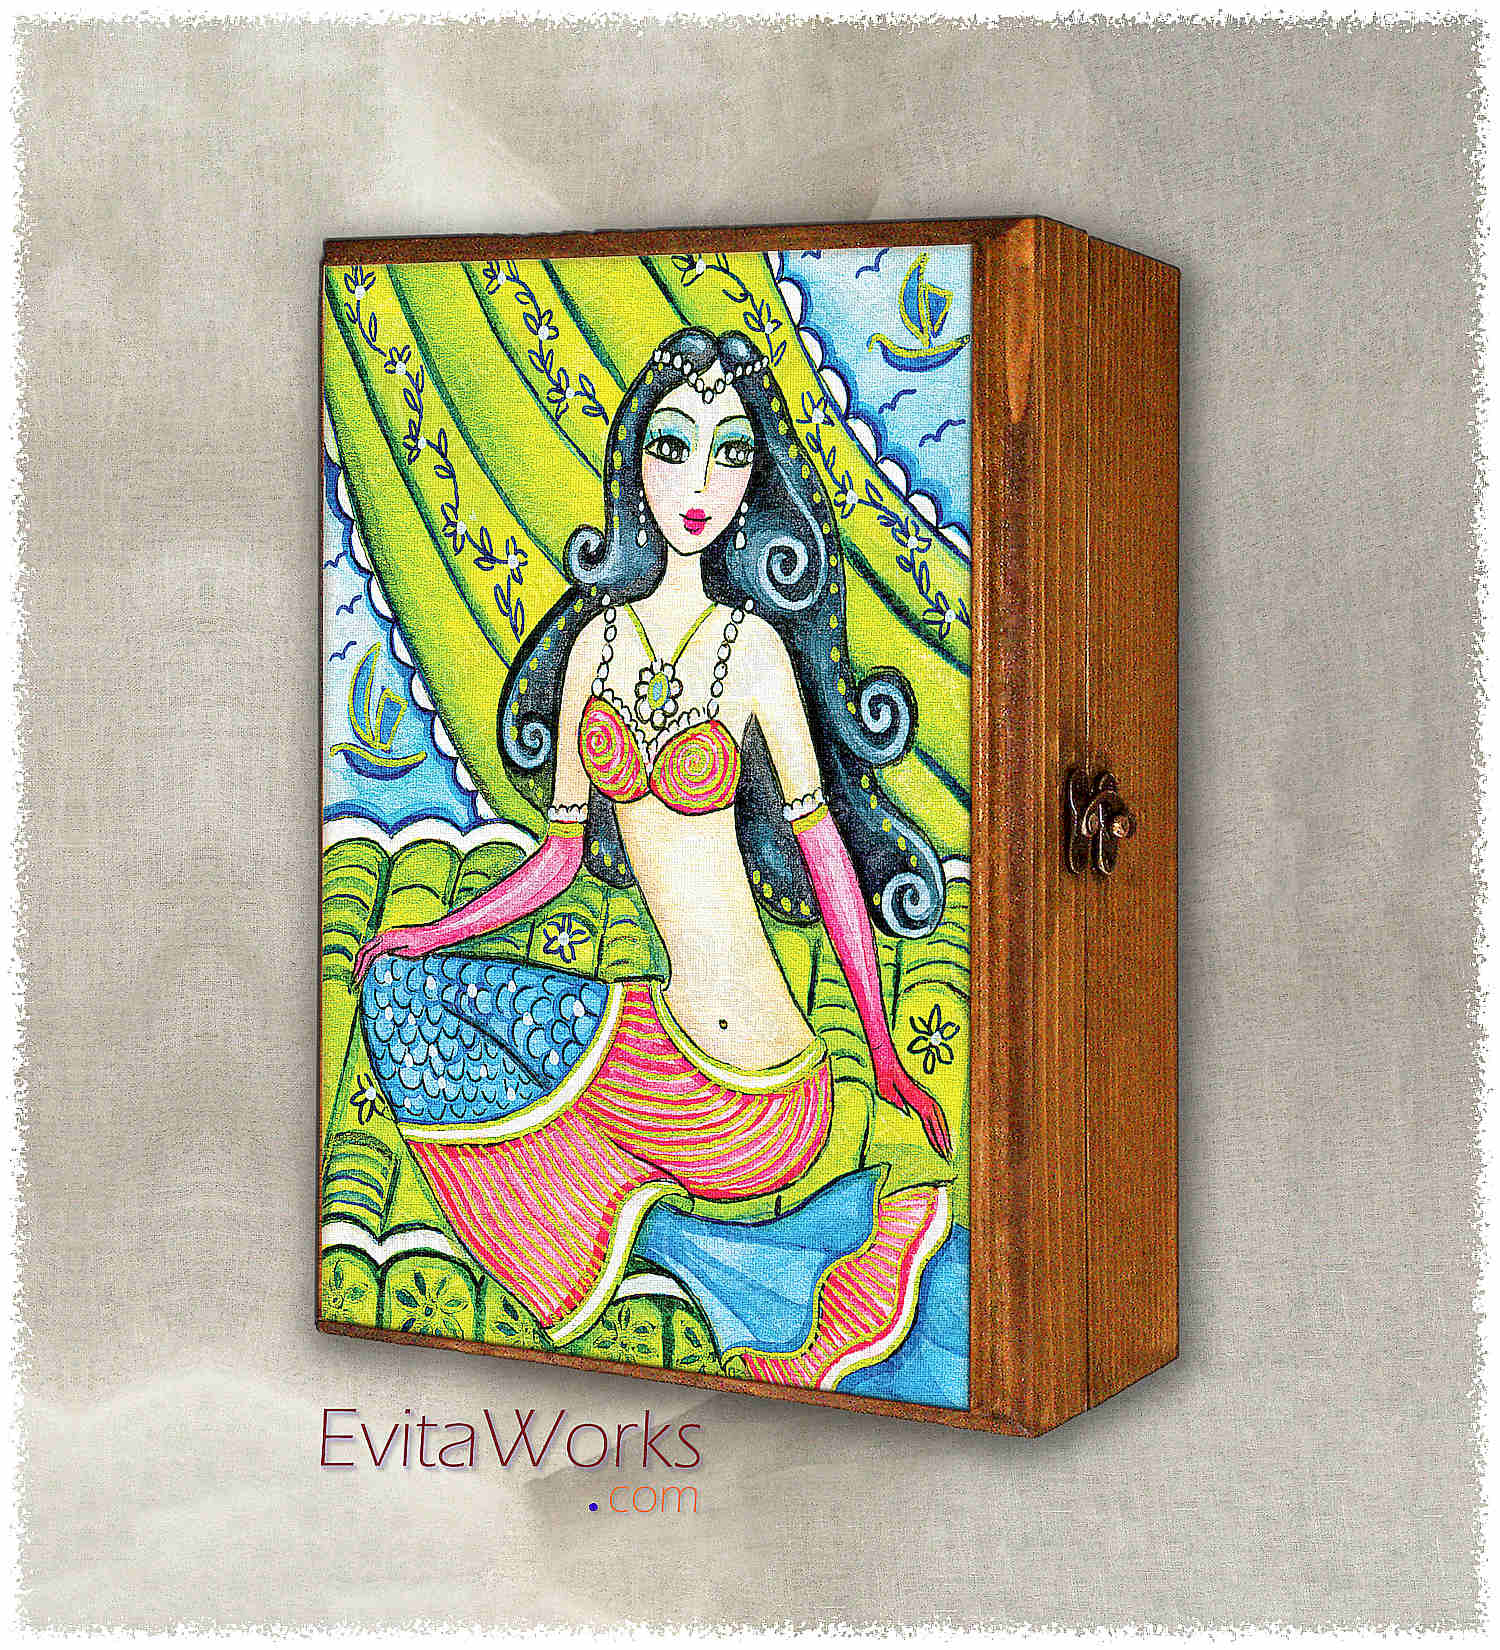 Hit to learn about "Mermaid 54, beautiful female creature" on jewelboxes